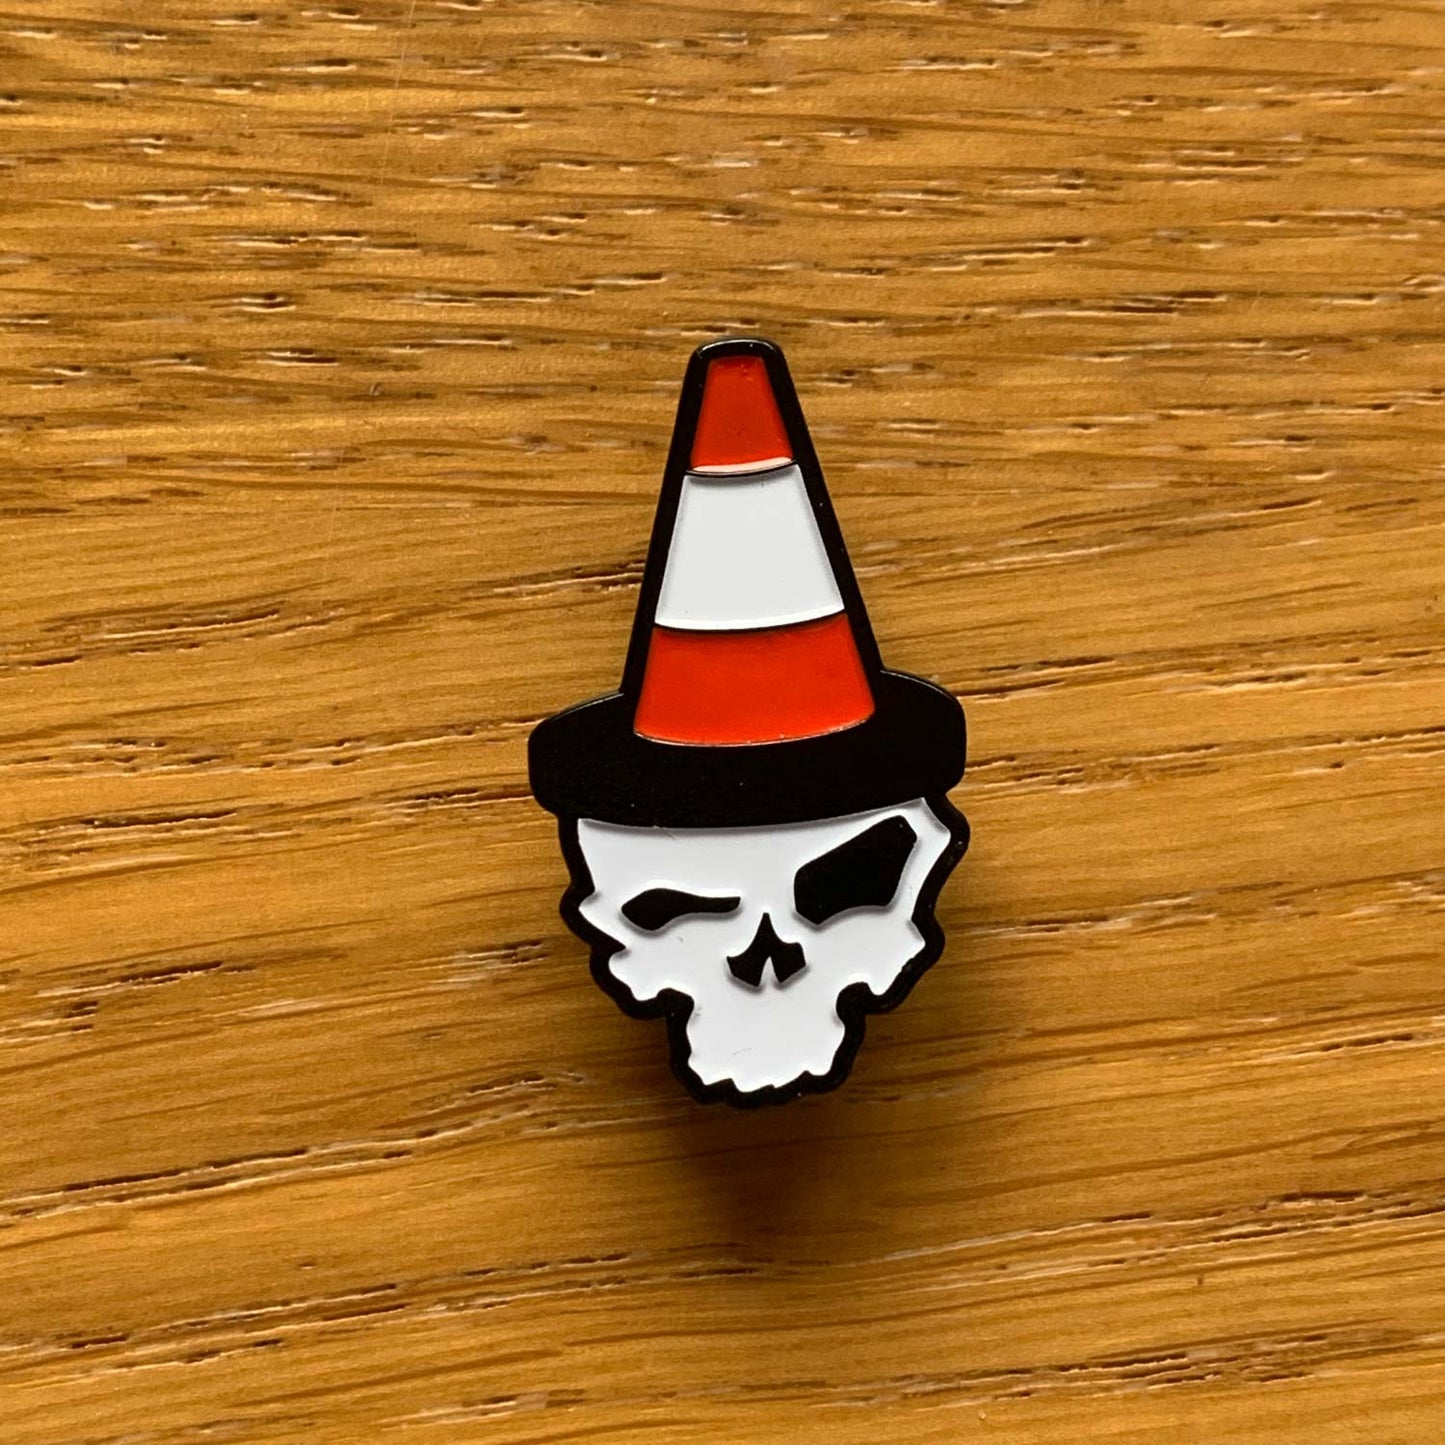 pirate skull with a traffic cone on its head